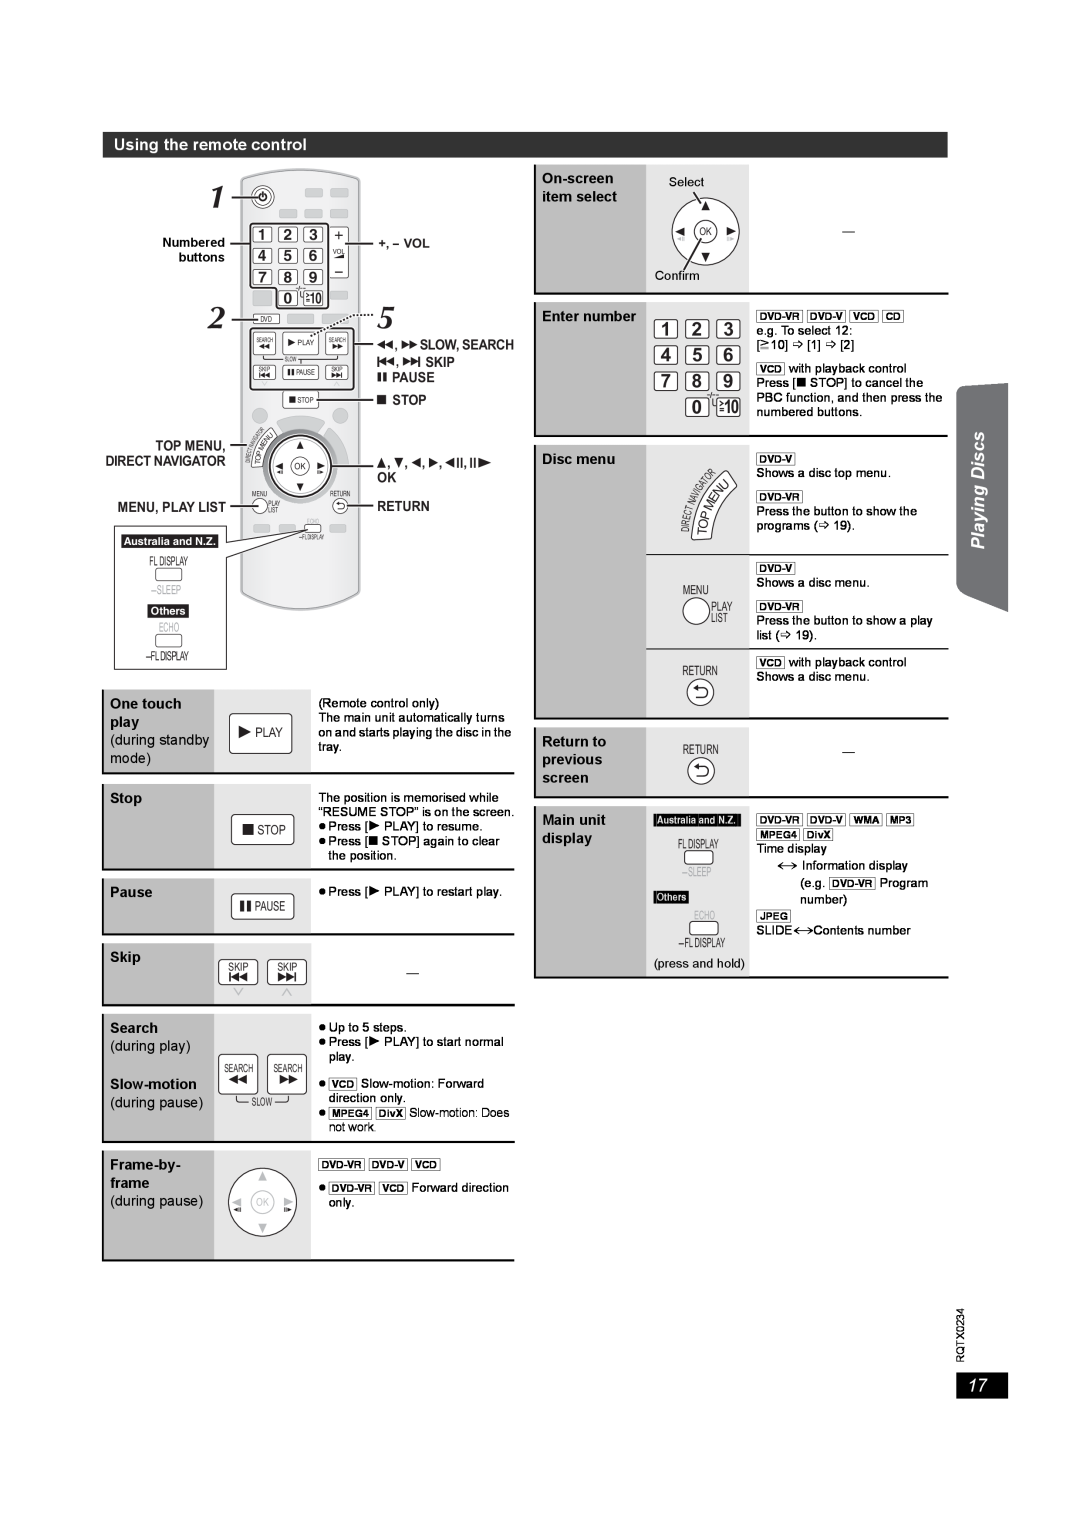 Panasonic SC-PT875 operating instructions Using the remote control 